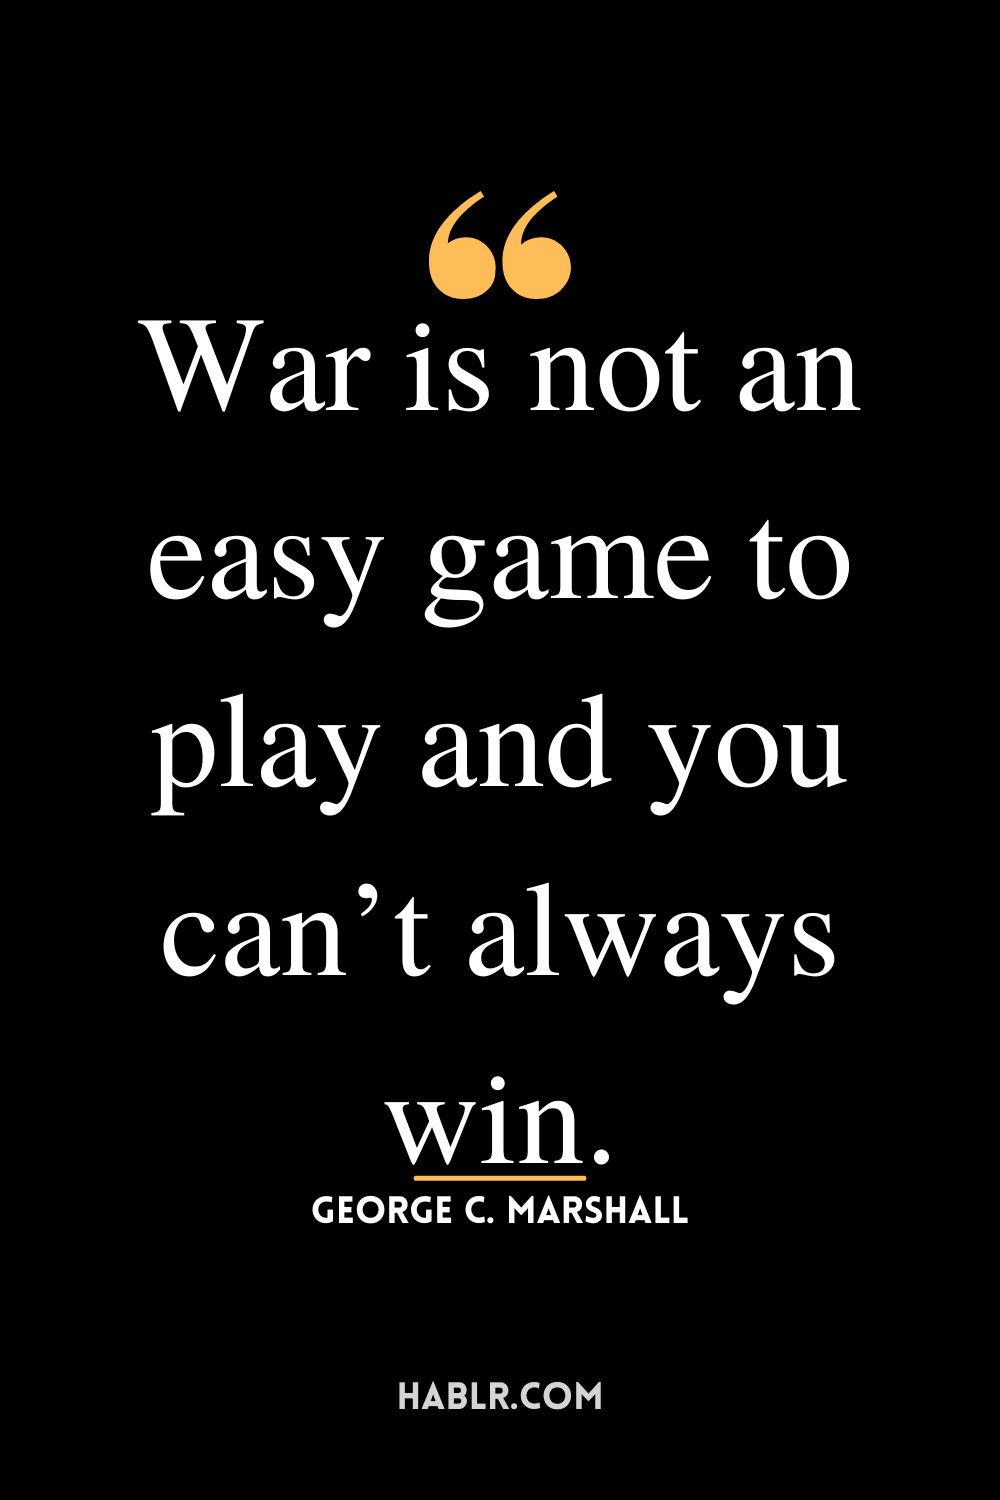 “War is not an easy game to play and you can’t always win.”-George C. Marshall 